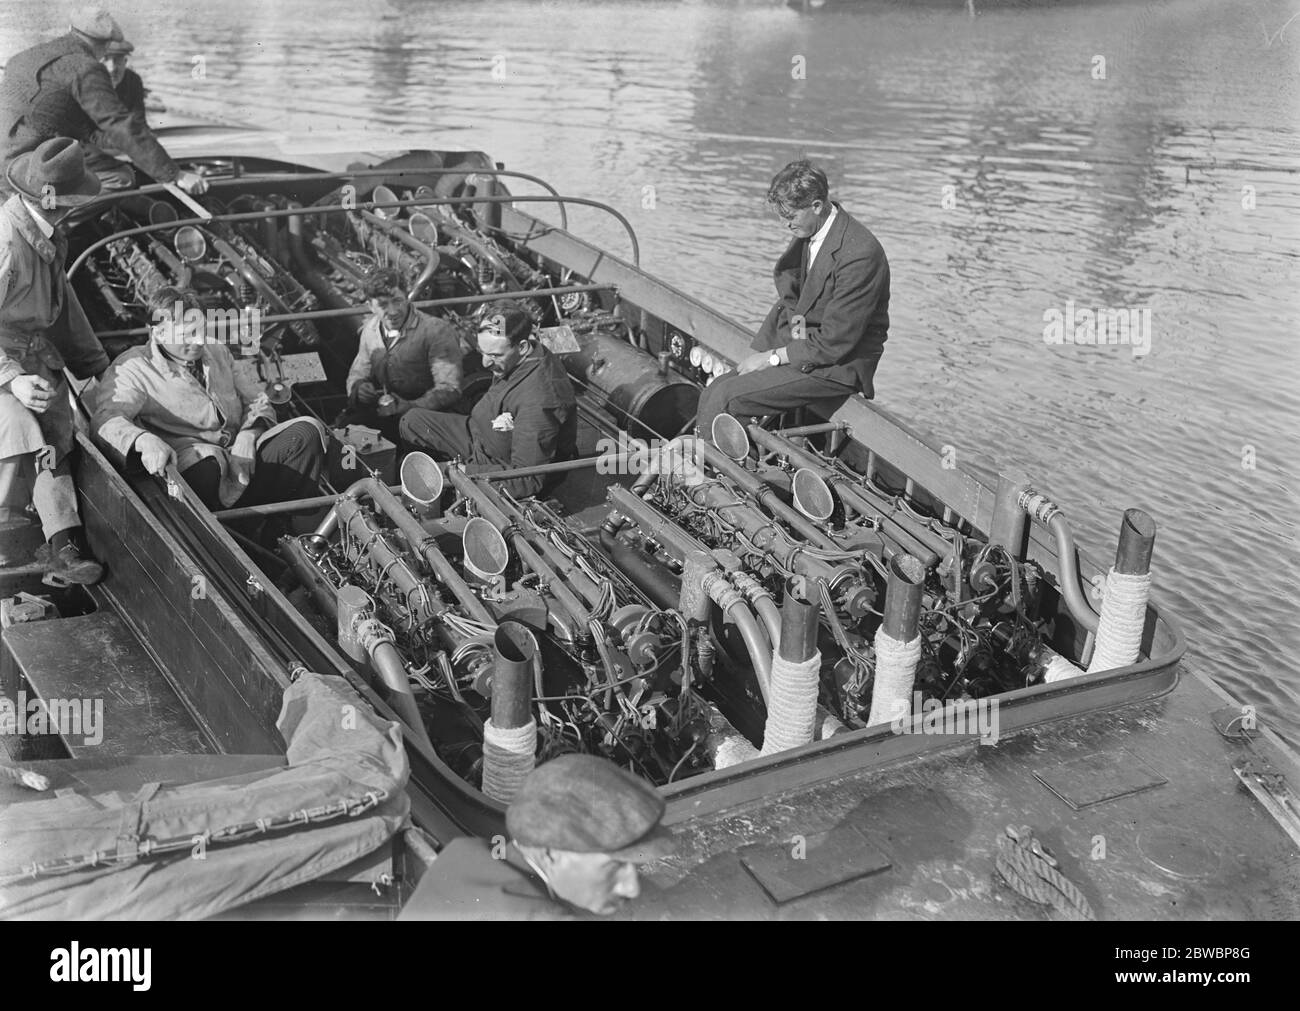 Motor Boat Race with 18 , 00 Hp Engine A view looking down on the Sunbeam racer   29 July 1920 Stock Photo